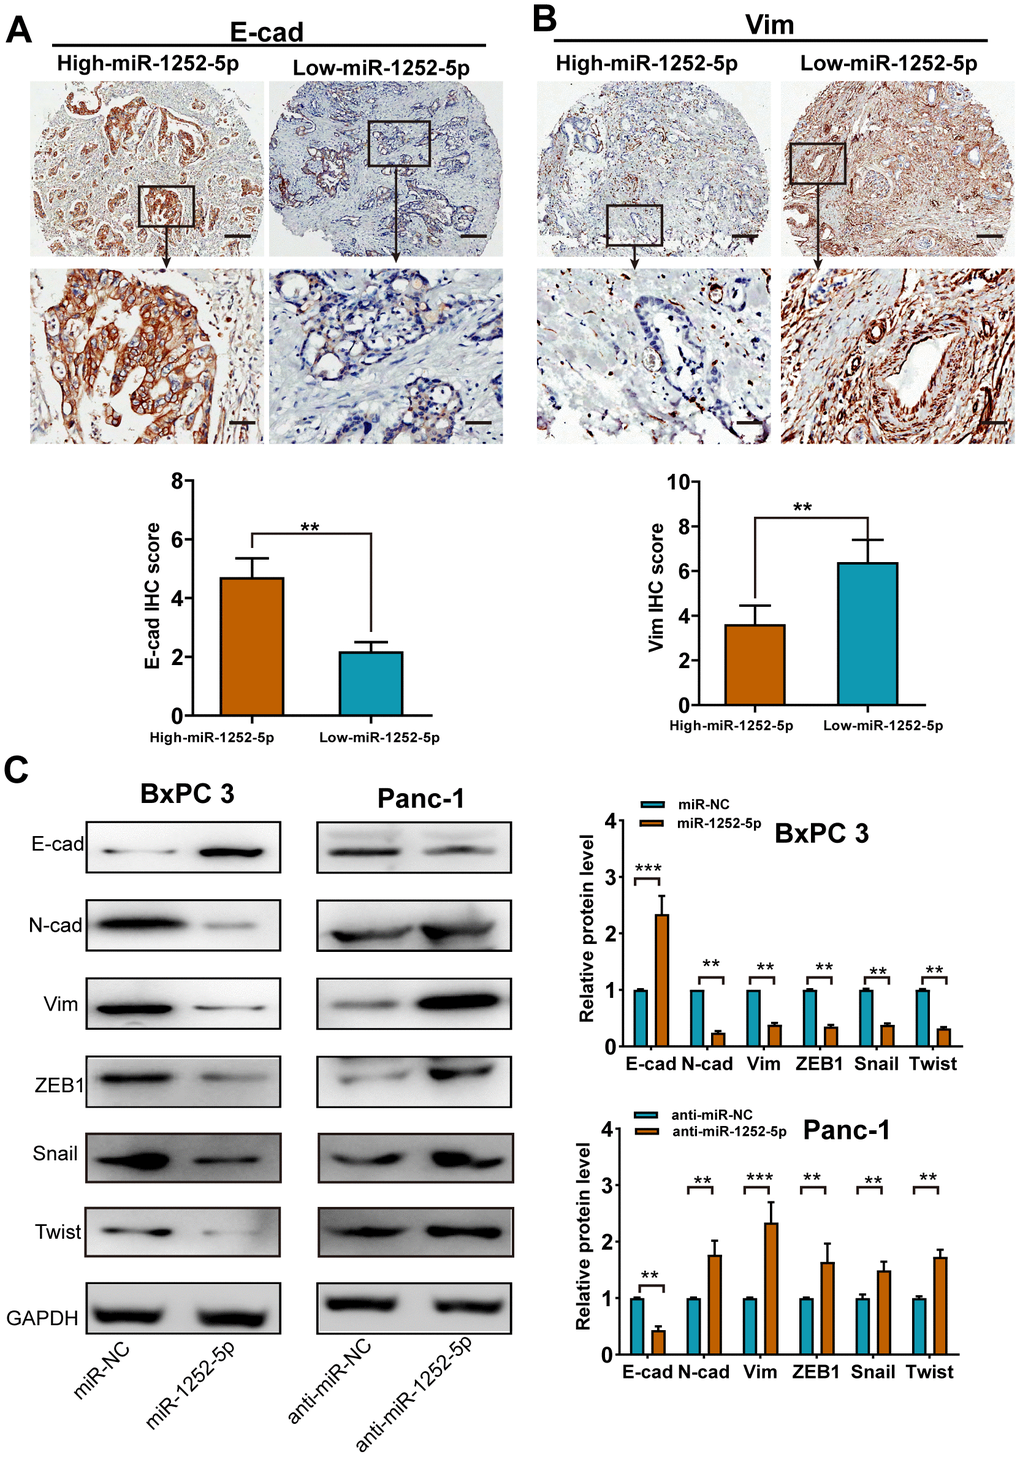 MiR-1252-5p inhibited the EMT process of PAC cells. (A, B) Representative immunohistochemical staining and histograms for E-cad (A) and Vim (B) expression were showed and compared between high- and low-miR-1252-5p expressing PAC tissues. Scale bar, 200μm for upper row and 40μm for lower row. (C) Western blot analysis of EMT markers (E-cad, N-cad, Vim, ZEB1, Snail and Twist) after transfection with corresponding miRNA vectors in PAC cells. GAPDH served as a loading control. E-cad, E-cadherin; N-cad, N-cadherin; Vim, Vimentin. **P P 